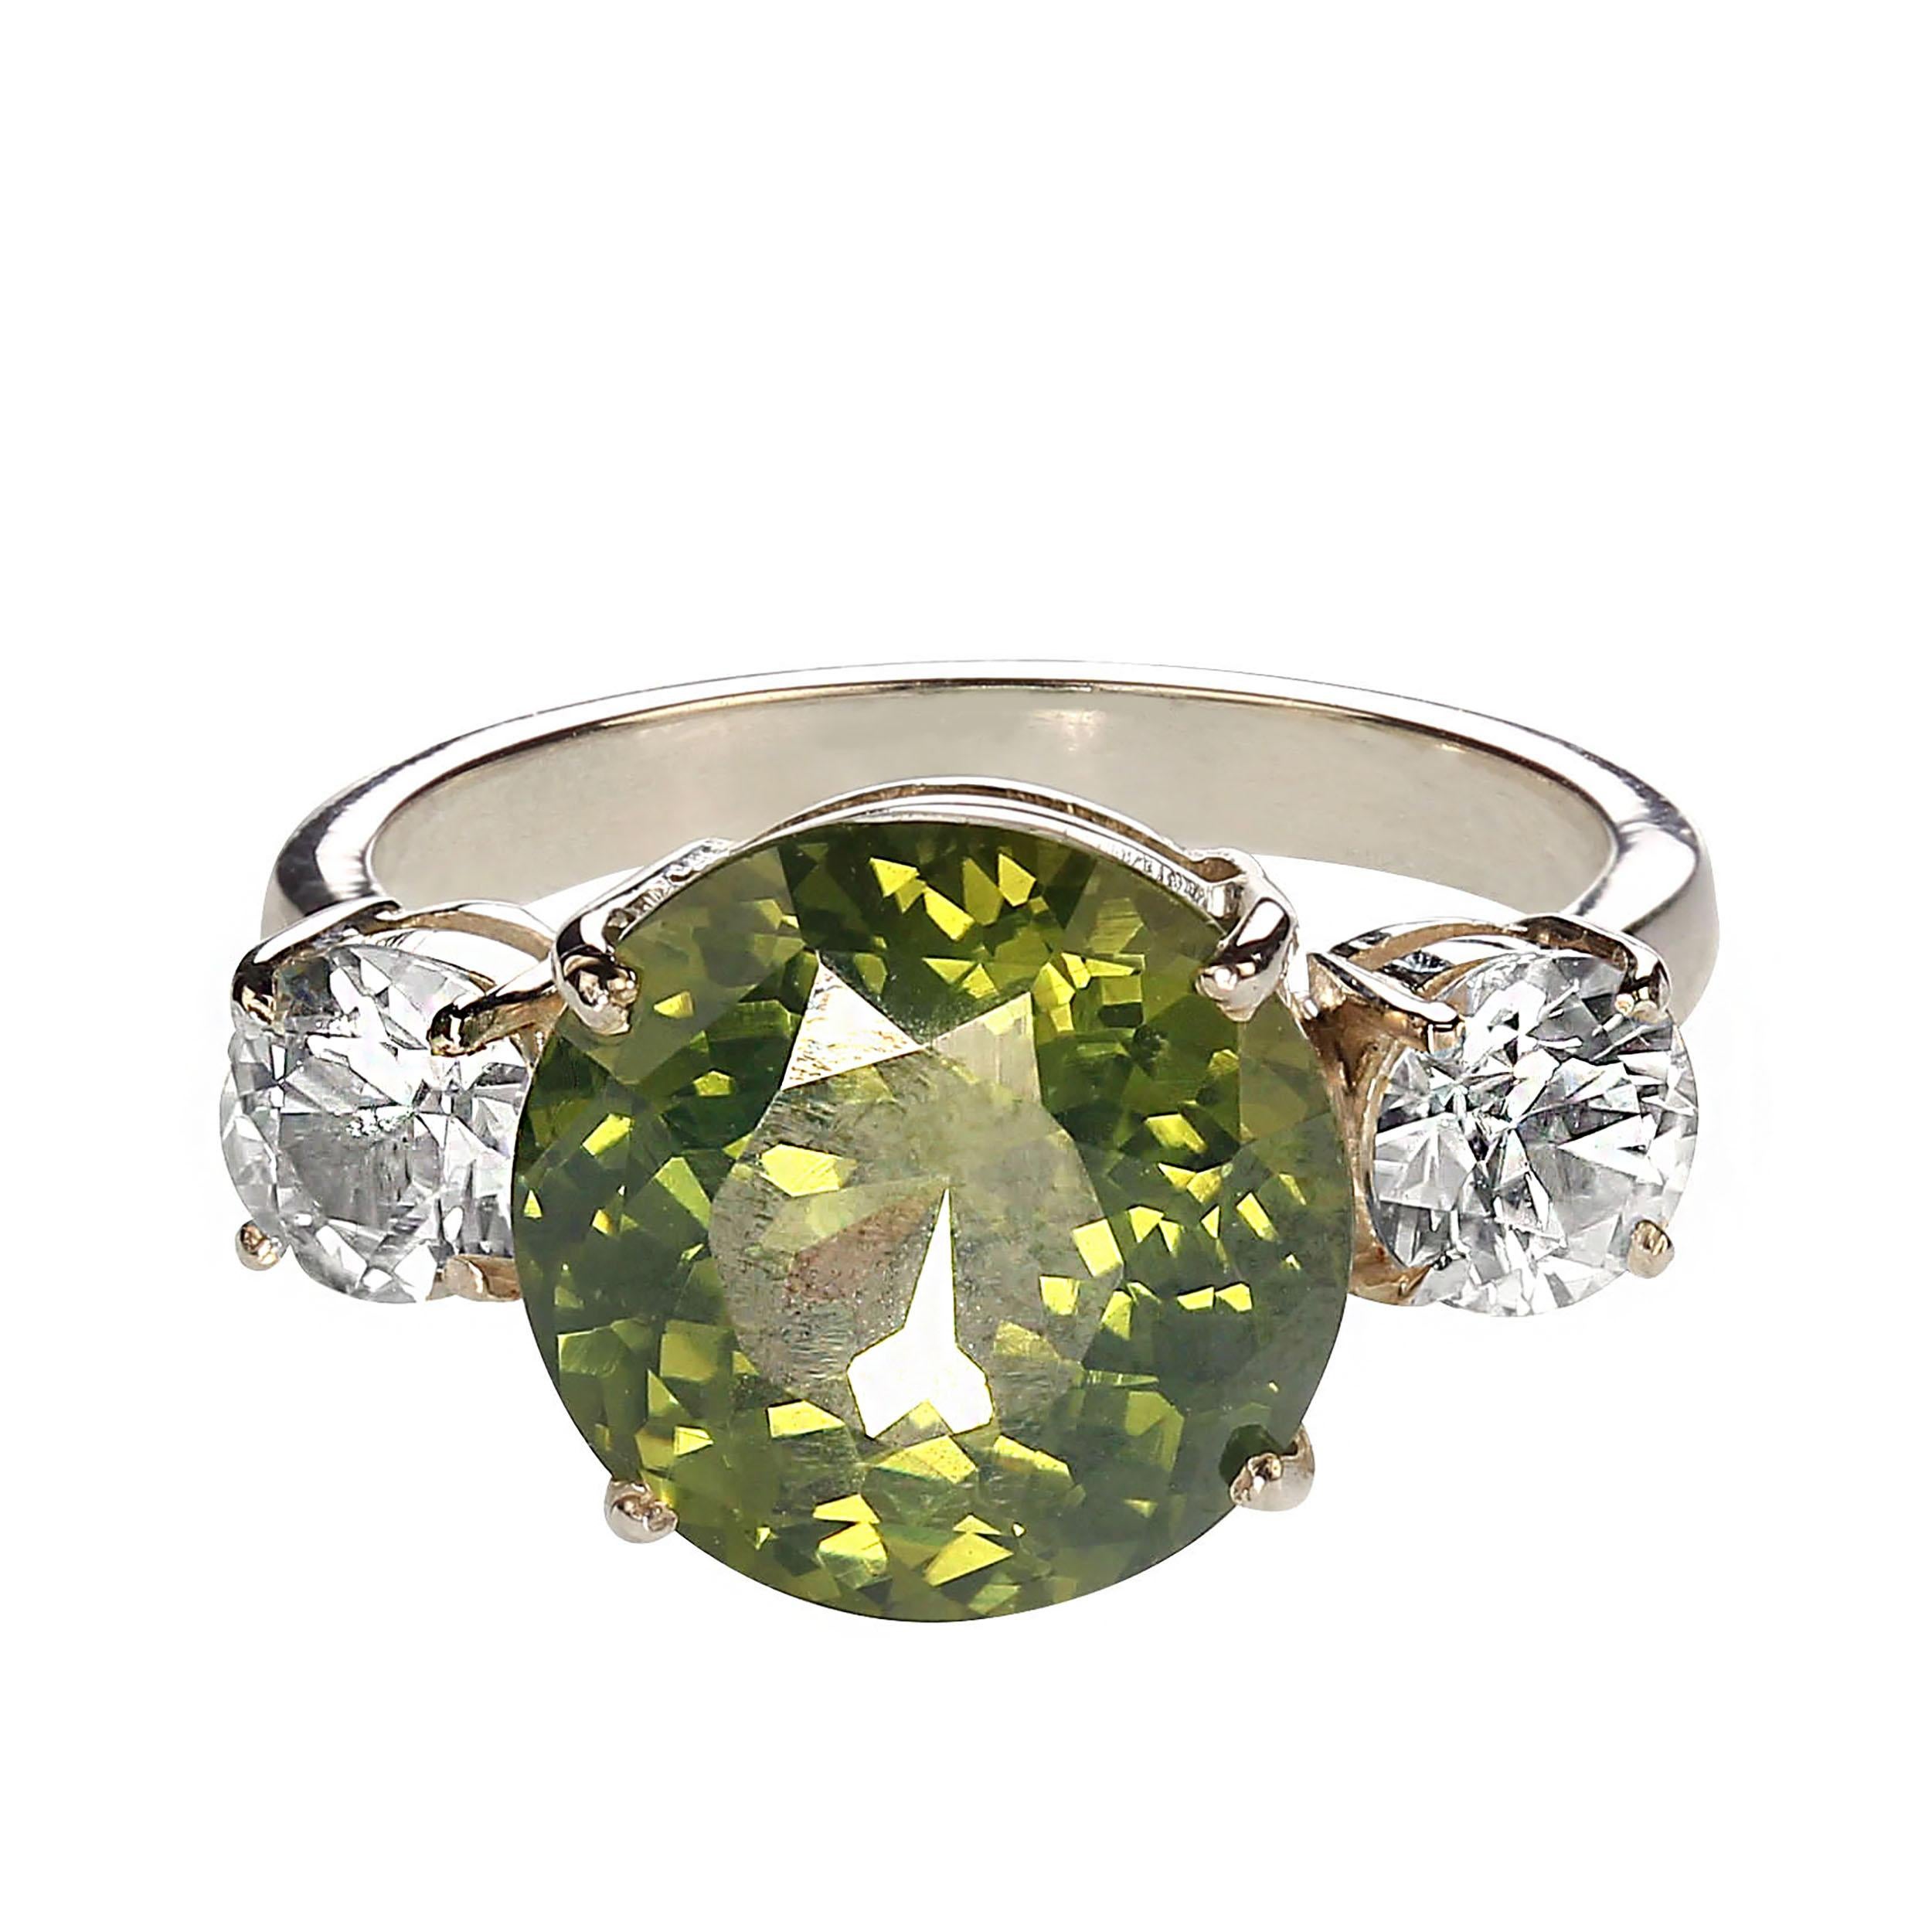 AJD Sophisticated 'Big Deal' Green and White Zircon Cocktail Ring For Sale 1